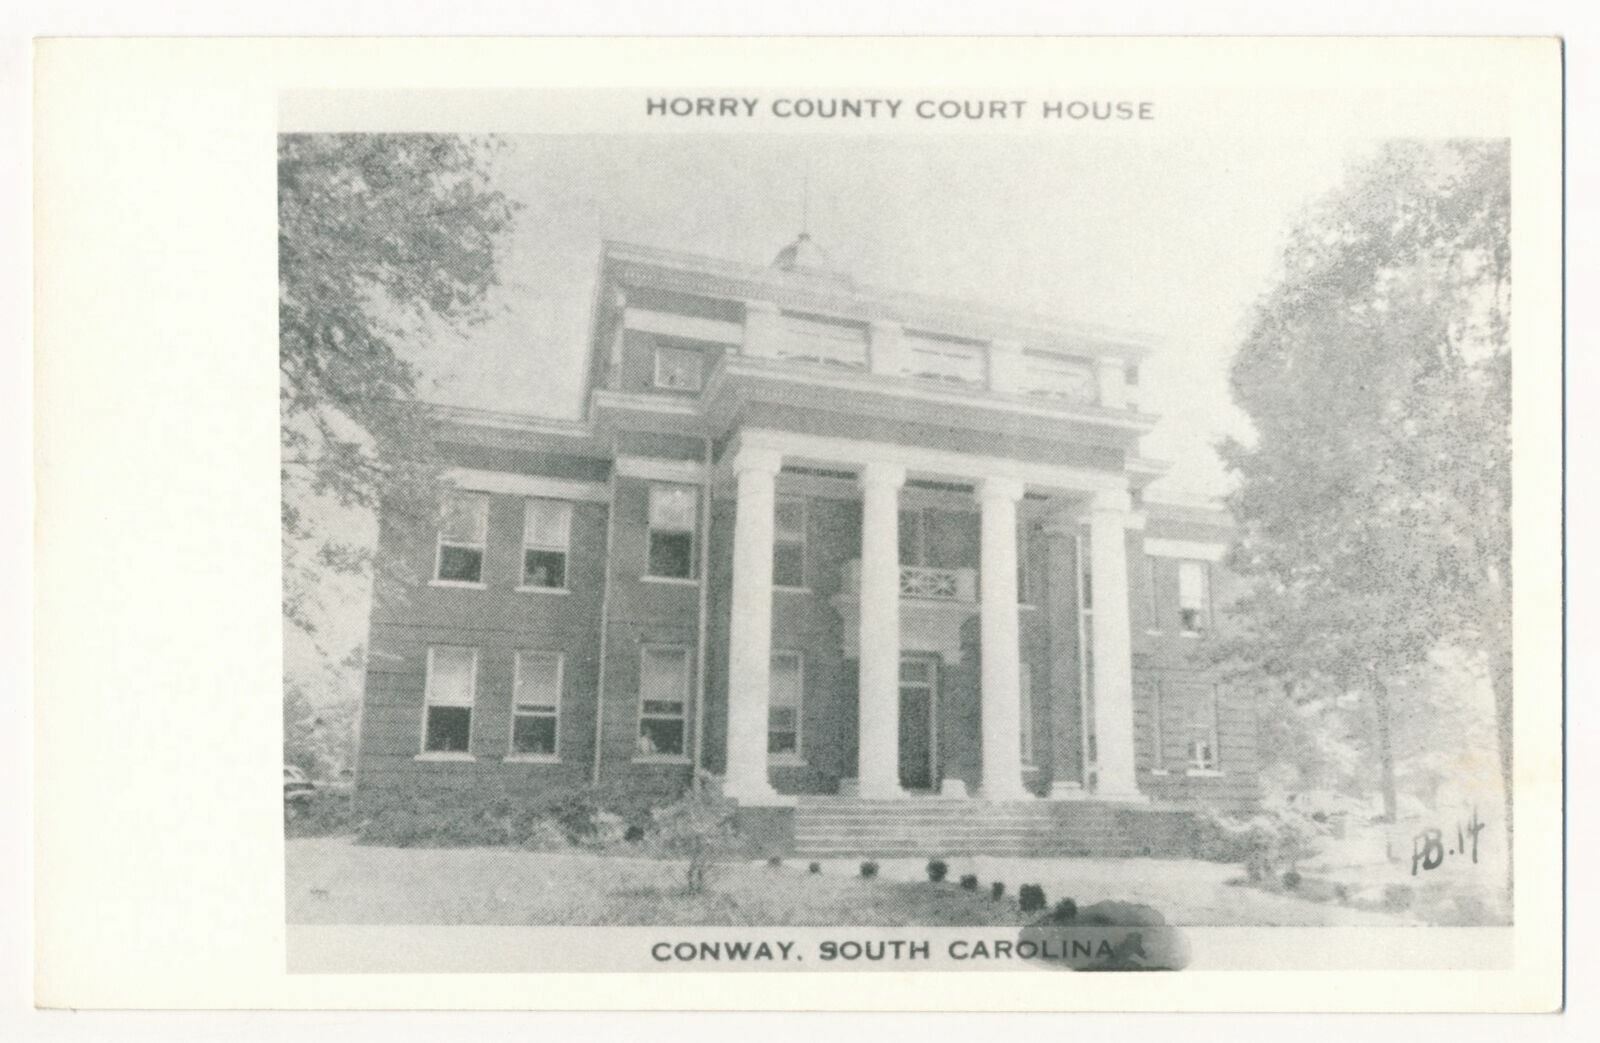 Horry County Court House, Conway, South Carolina